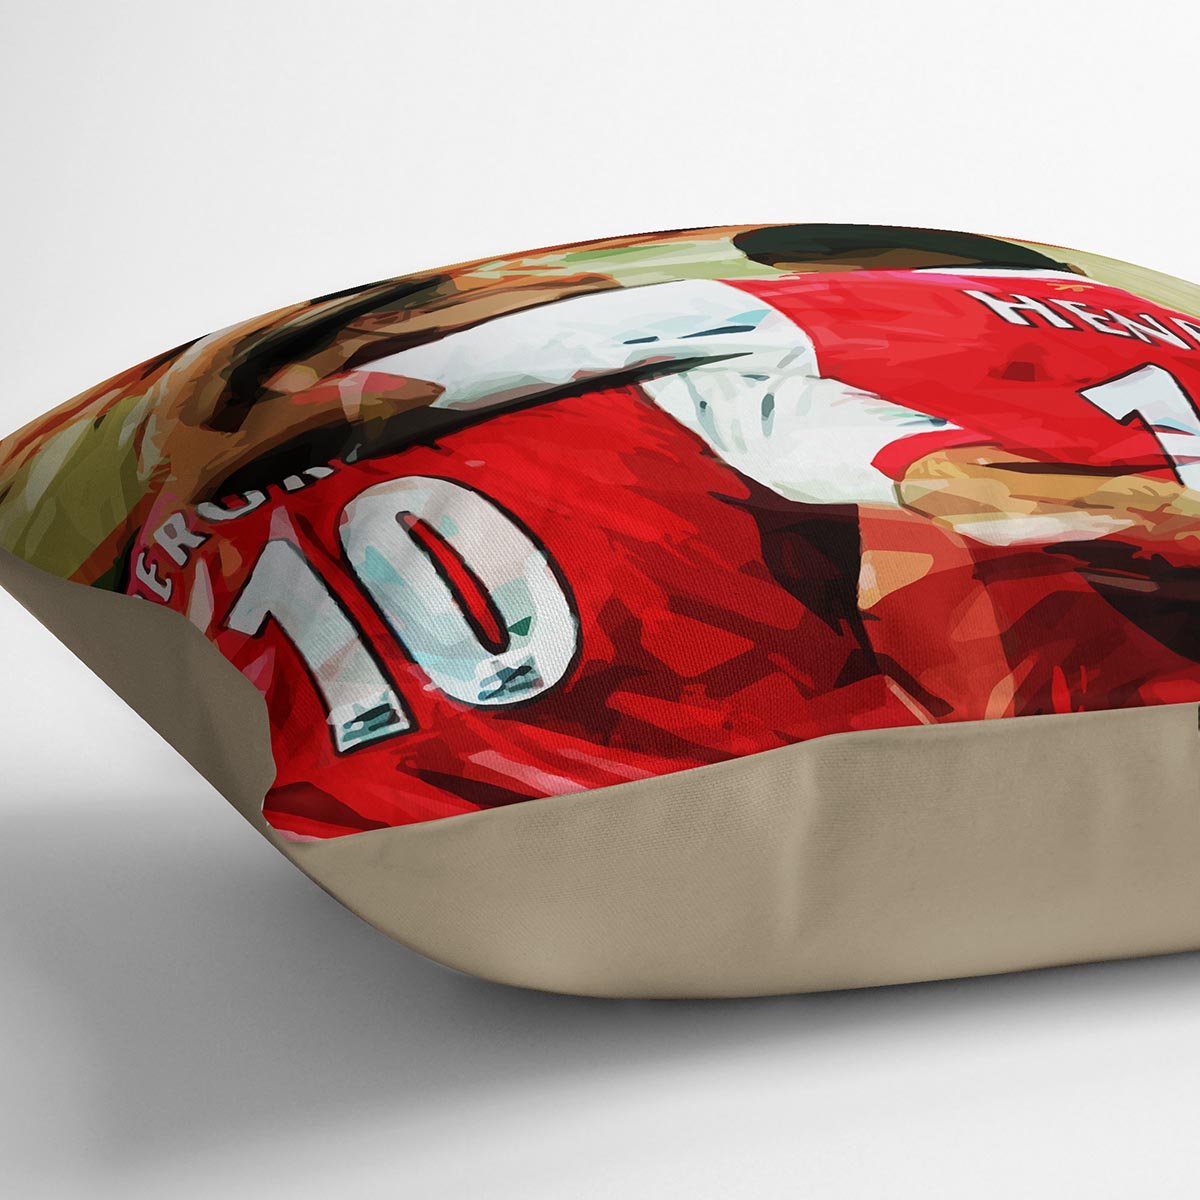 Dennis Bergkamp and Thierry Henry Cushion